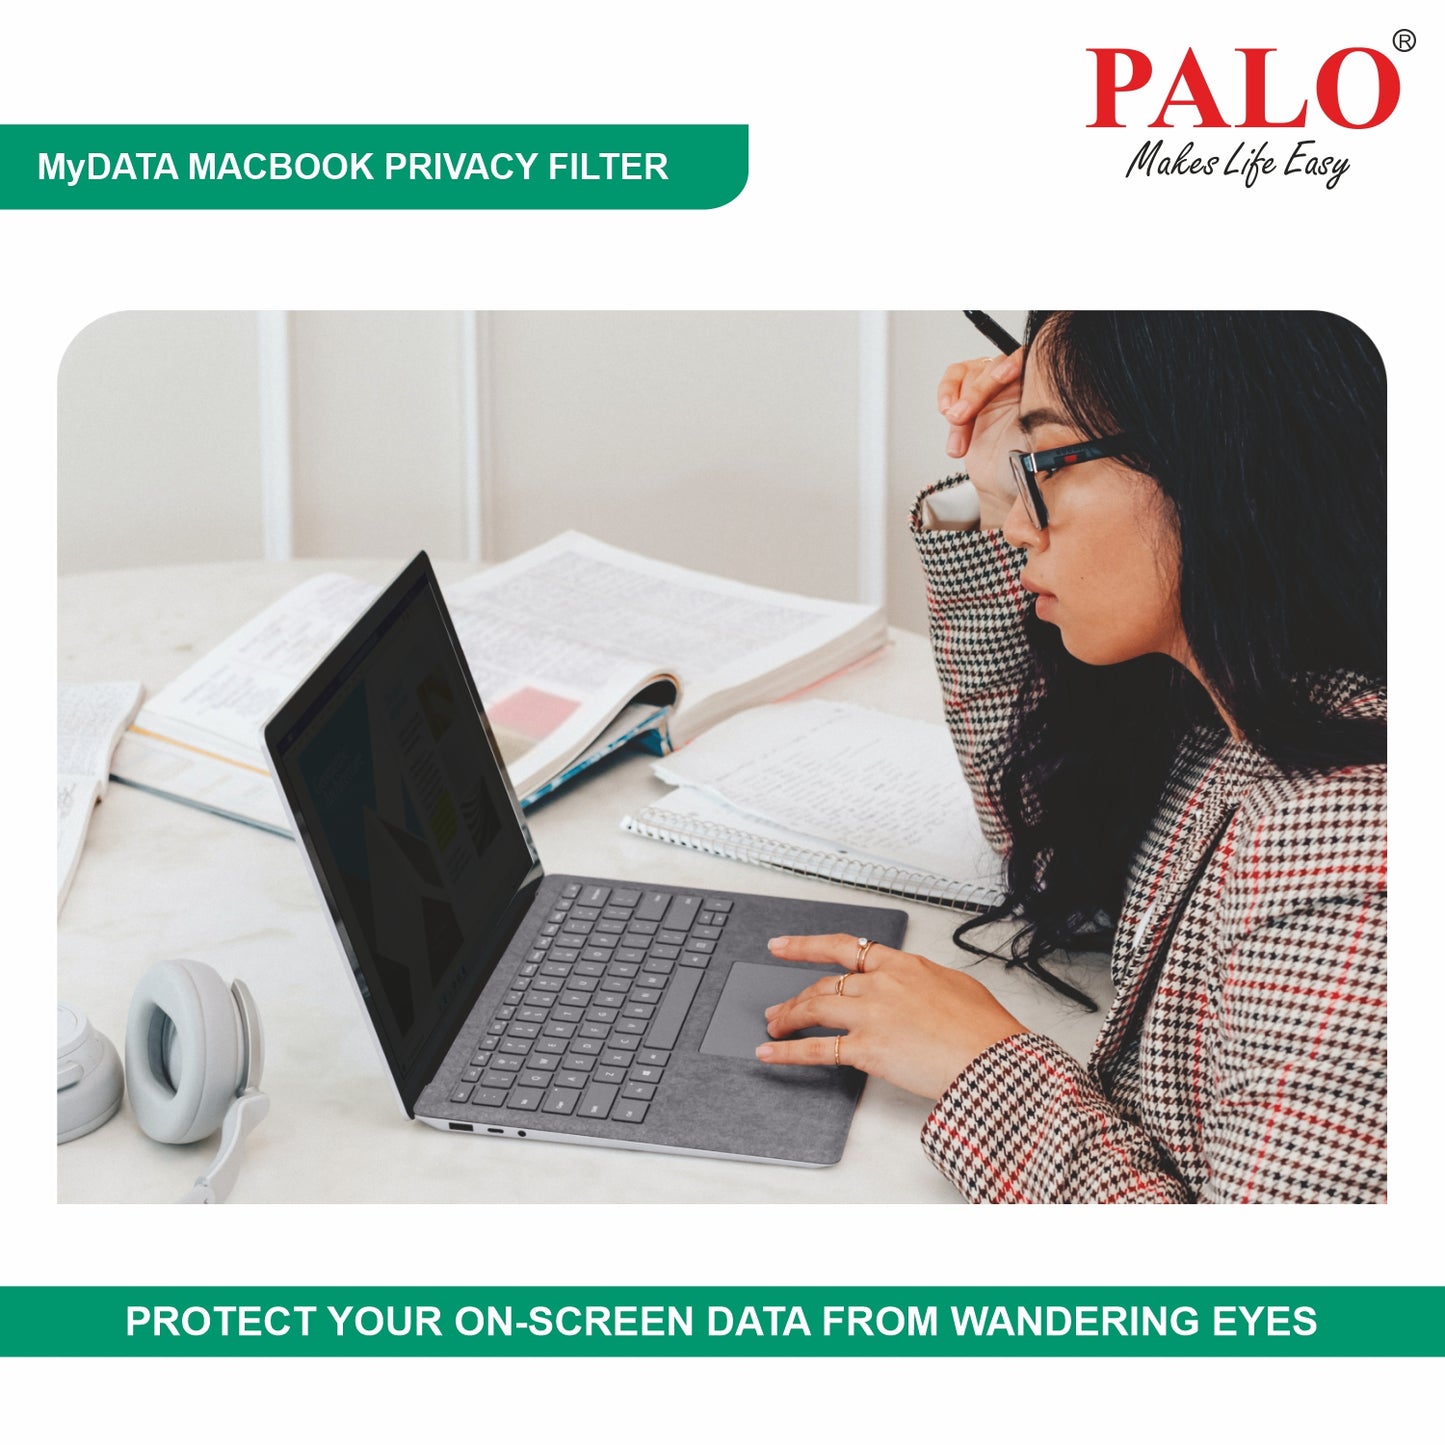 PALO MyDATA Magnetic Privacy Filter for Apple Macbook